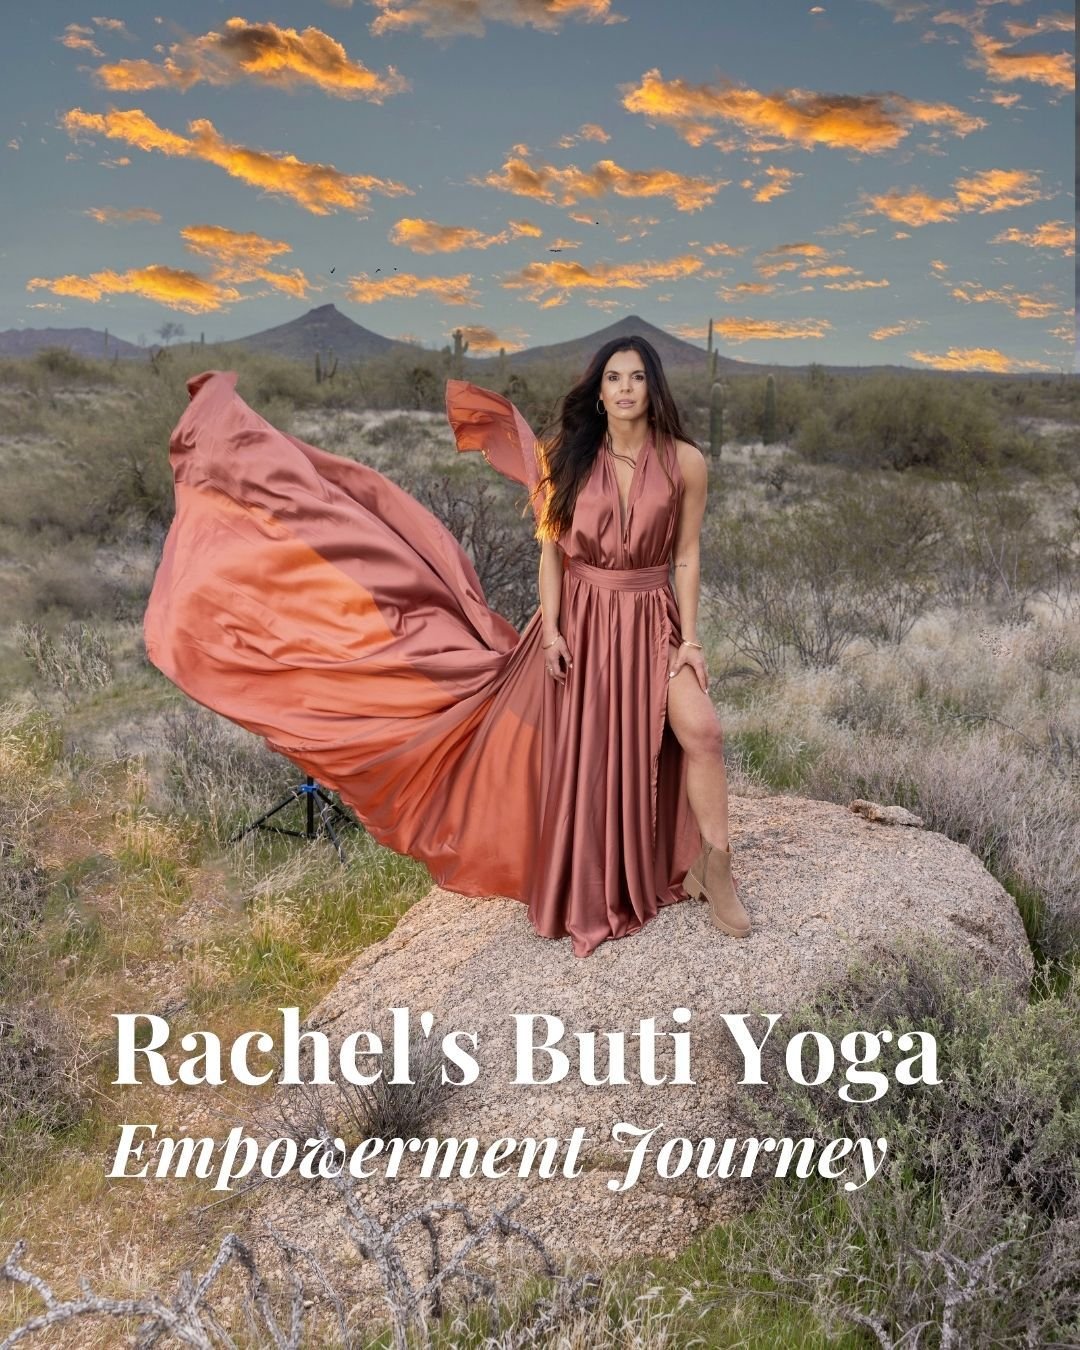 Meet Rachel, Buti Yoga instructor and breast cancer survivor, embracing life's epic moments. From dynamic photoshoots with leaf blowers to empowering yoga classes, Rachel's journey is one of resilience and growth. Through EMPWR MVMNT, she creates a s